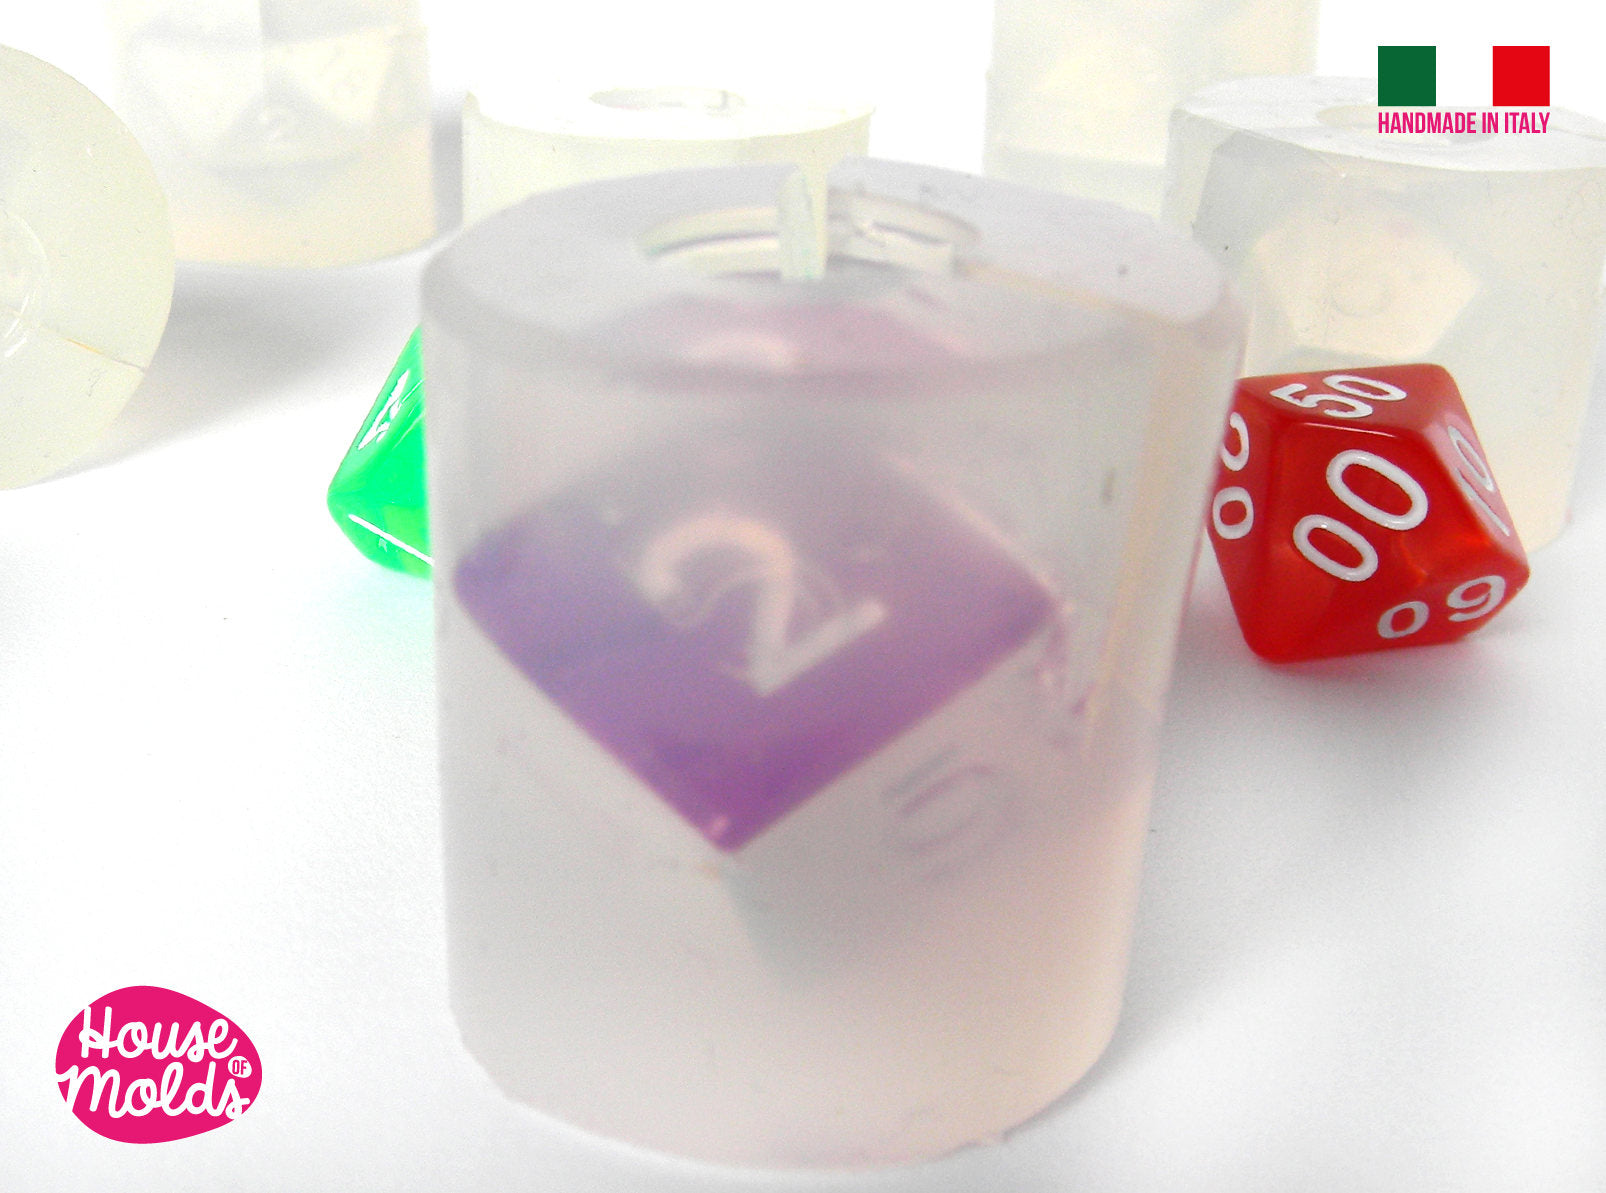 Blank Gaming DND Dice Clear Silicone Mold 